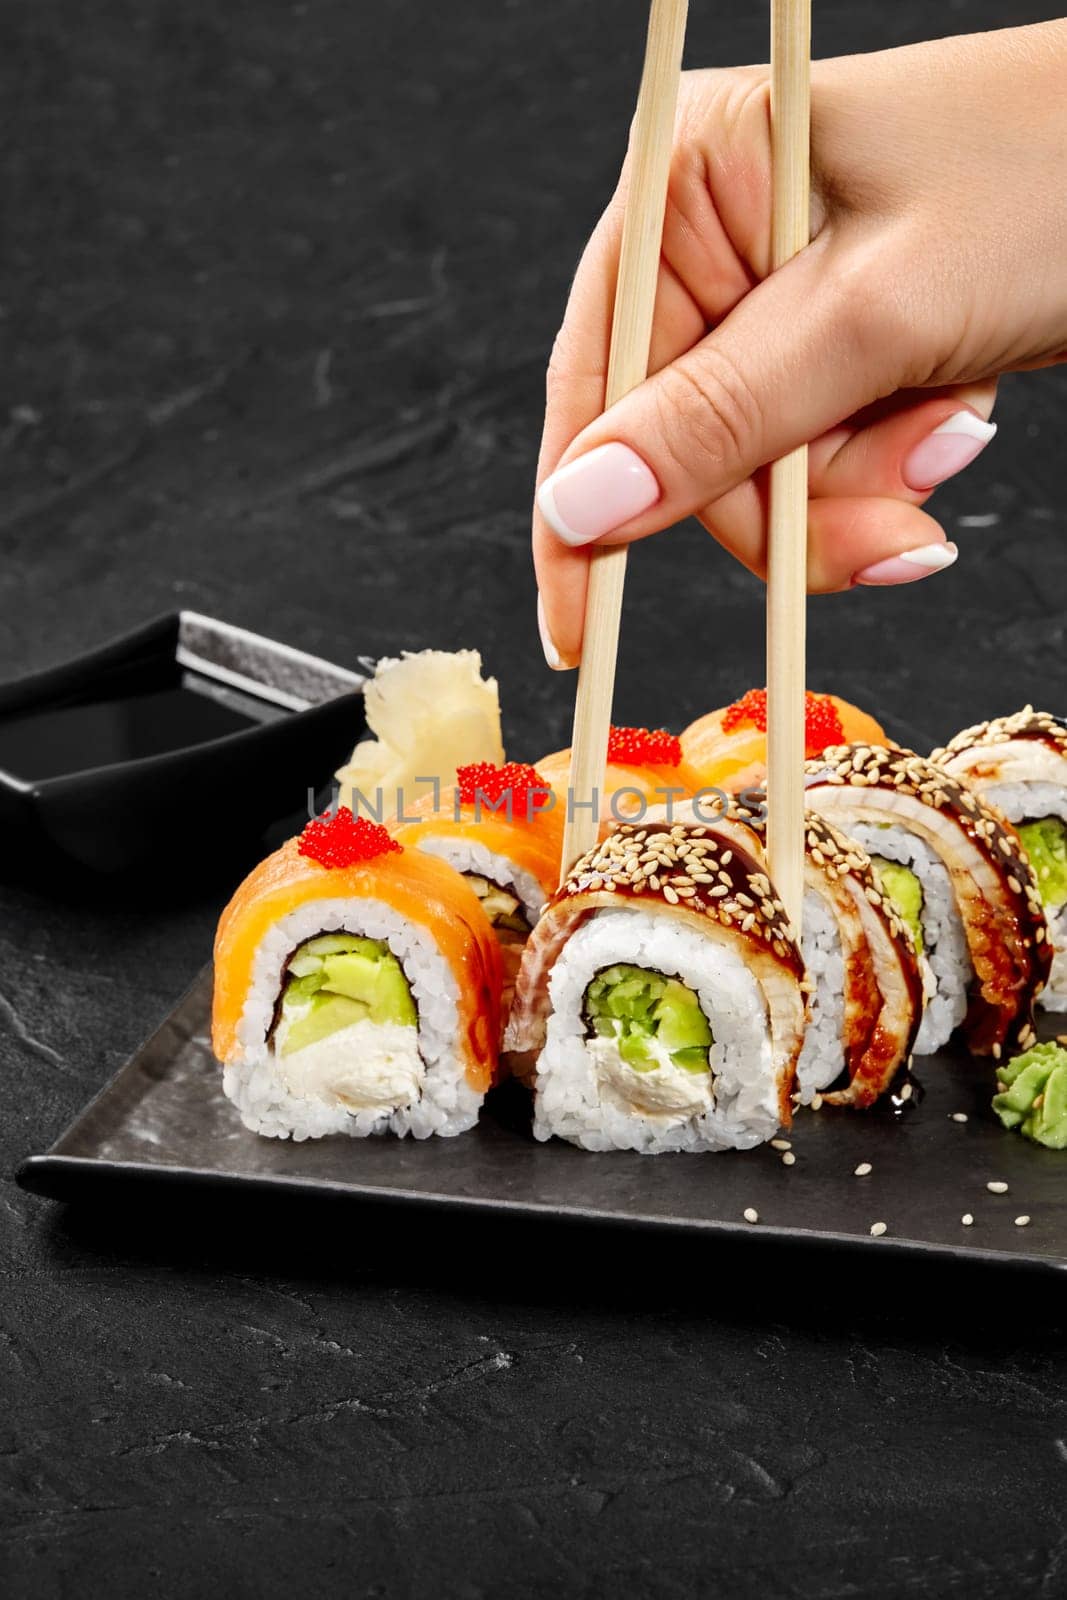 Female hand using wooden chopsticks to pick up appetizing sushi roll filled with cucumber, avocado and cream cheese topped with eel, sesame and unagi sauce from plate against black background